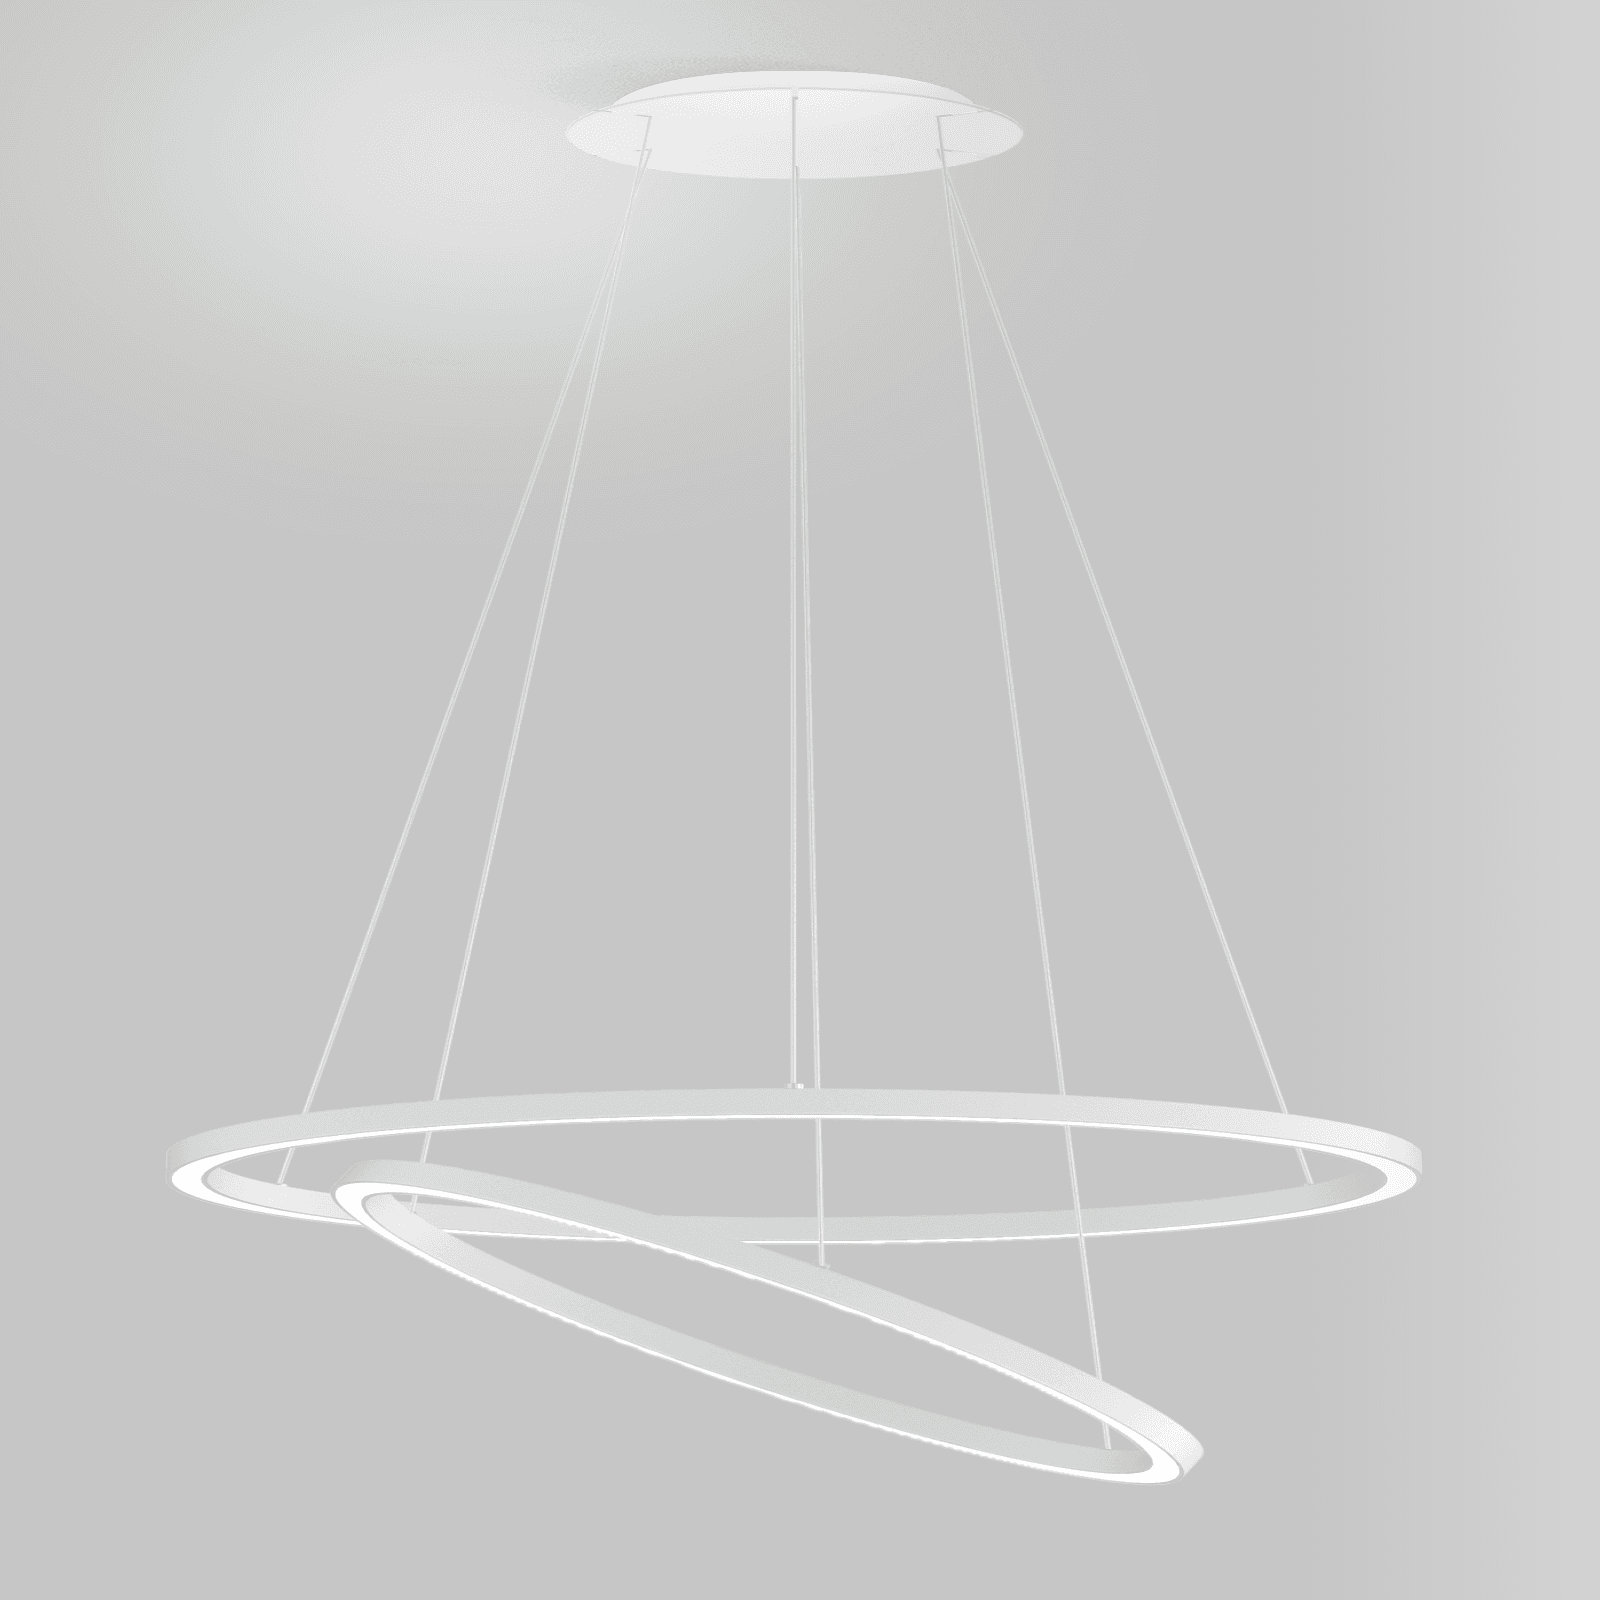 Gallery Product Tour Slim Suspension Light Linealightgroup 1200X1200 1 (1)